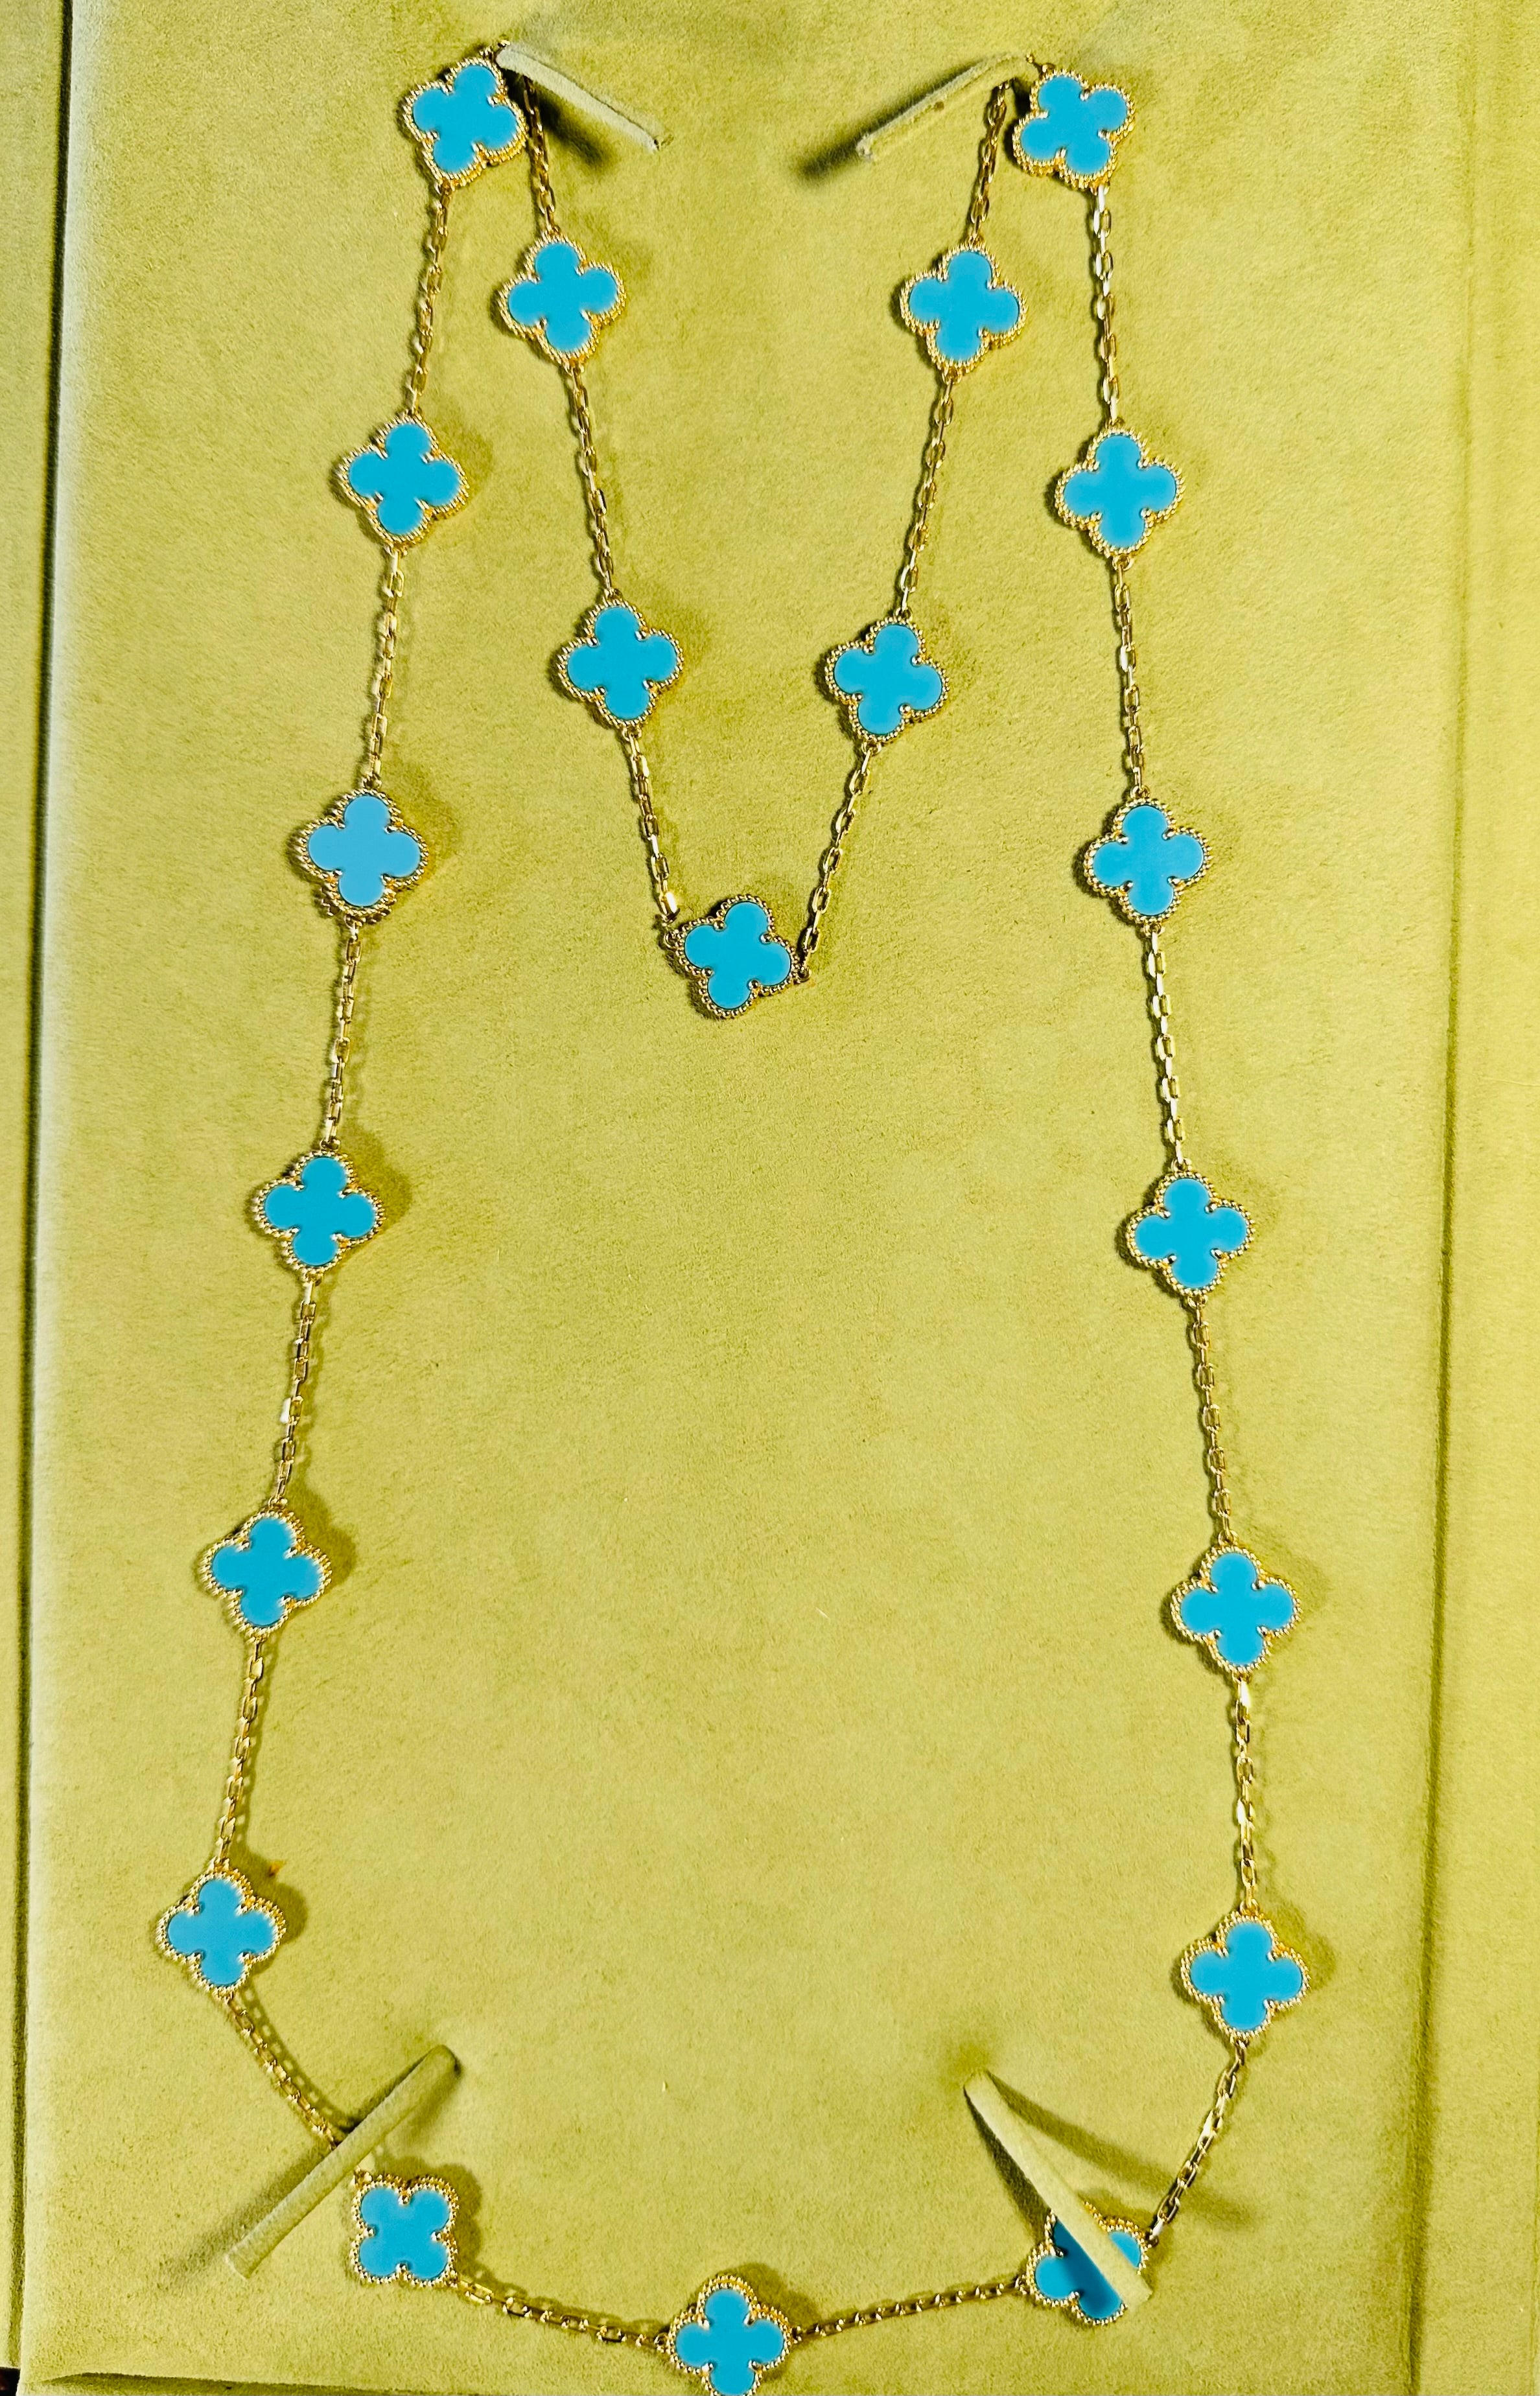 This classic vintage Van Cleef & Arpels necklace is crafted in 18k yellow gold and features 20 lucky clover motifs inlaid with turquoise in round bead settings. Made in France. 
Comes with original case serial number and papers
Clasp in 18K yellow